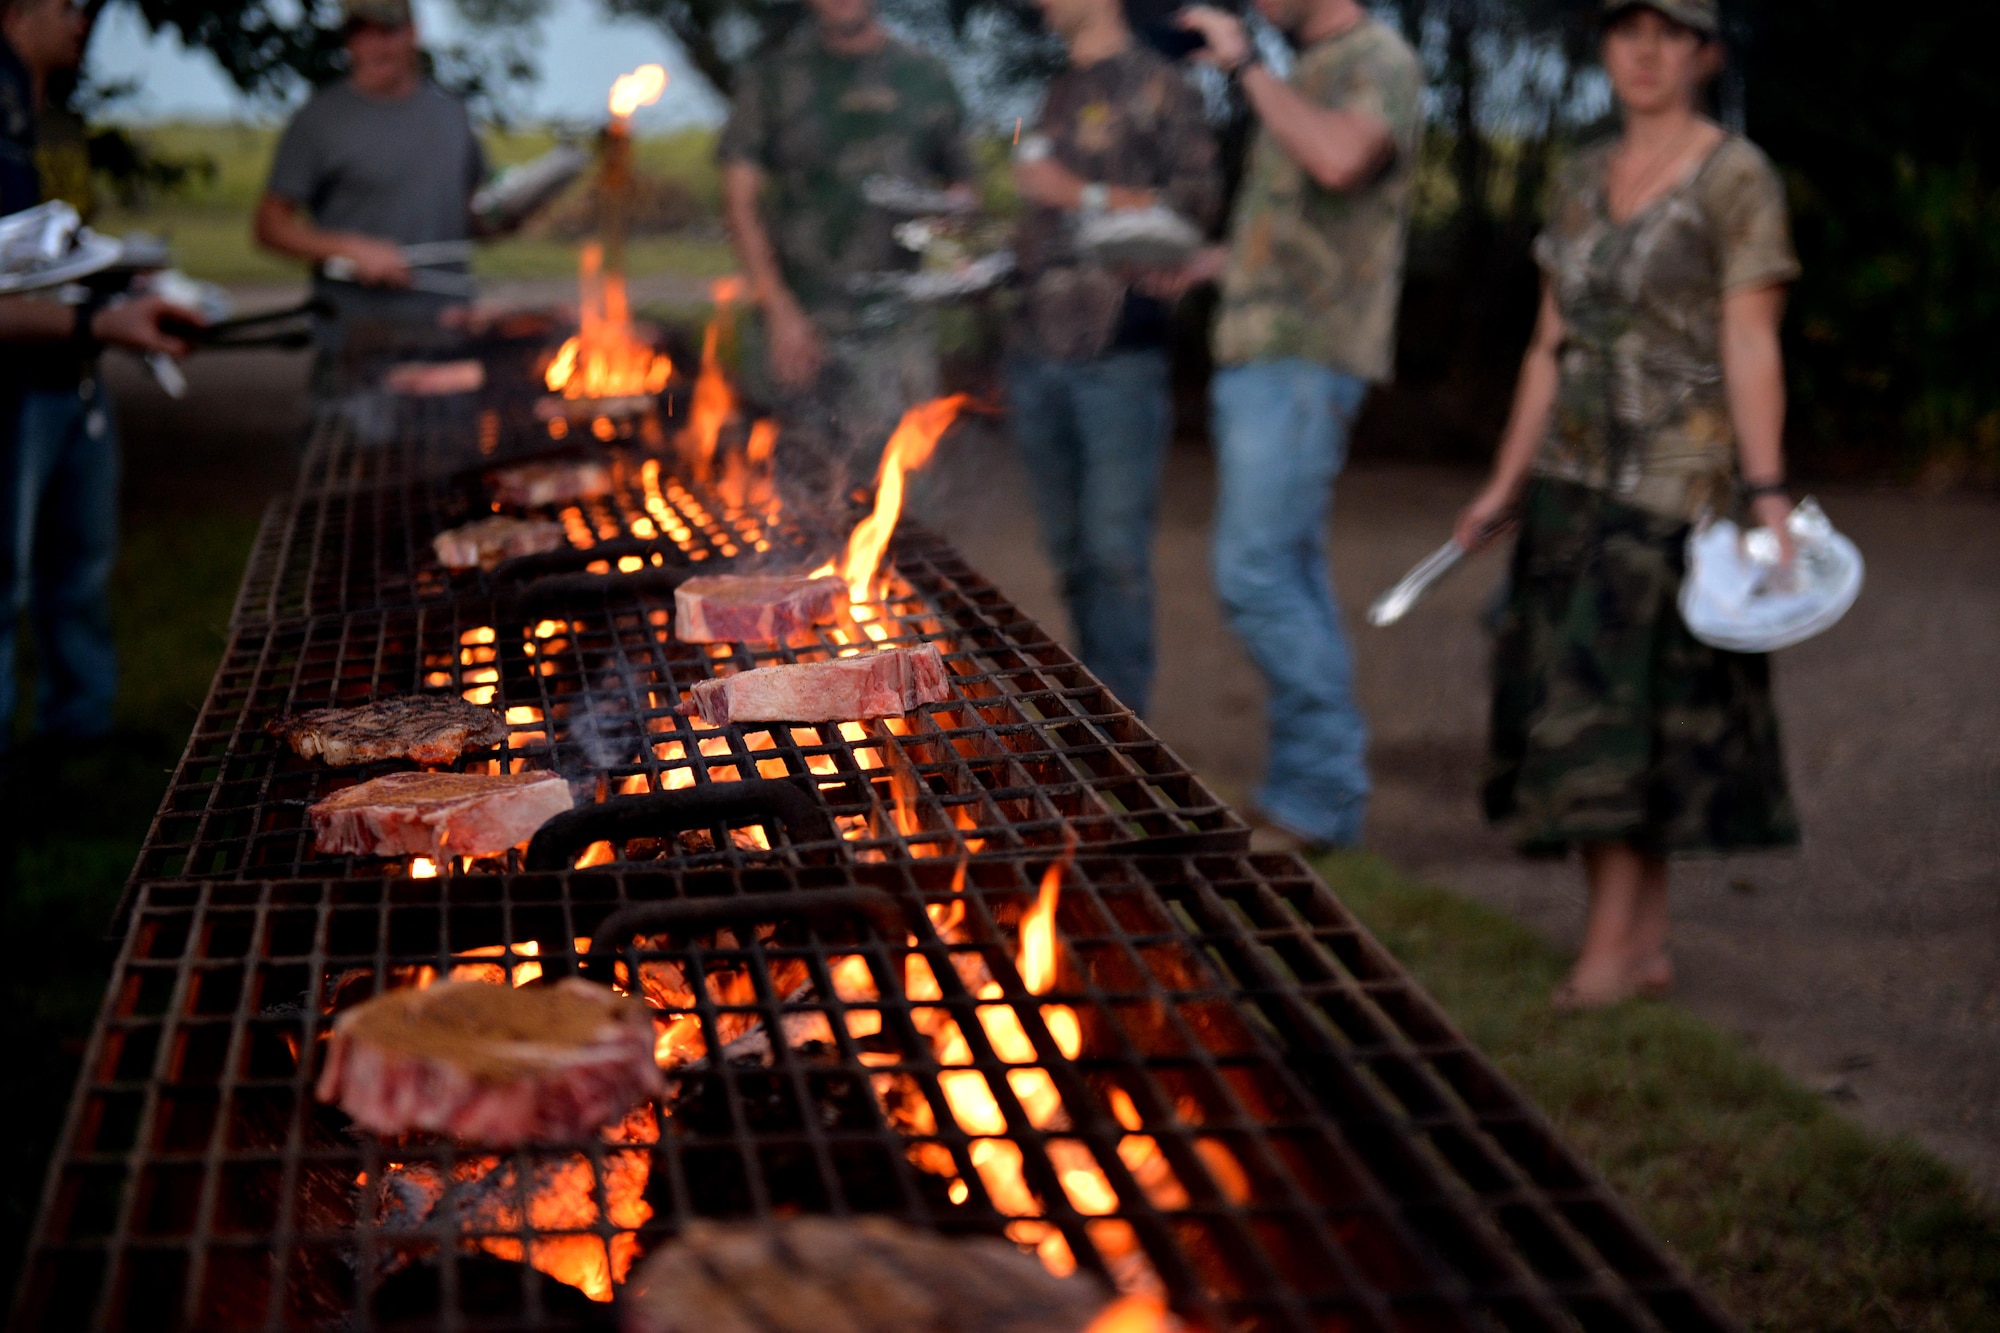 Airmen grill fresh hand-cut steaks after an evening of hunting dove in Henrietta, Texas, Sept. 10, 2016. Birdwell and Clark Ranch hosted the 12th Annual Clay County Dove Salute and invited nearly 175 Airmen from Sheppard Air Force Base, Texas, to hunt through the evening and stay for a steak dinner held at the ranch. (U.S. Air Force photo by Senior Airman Kyle E. Gese)